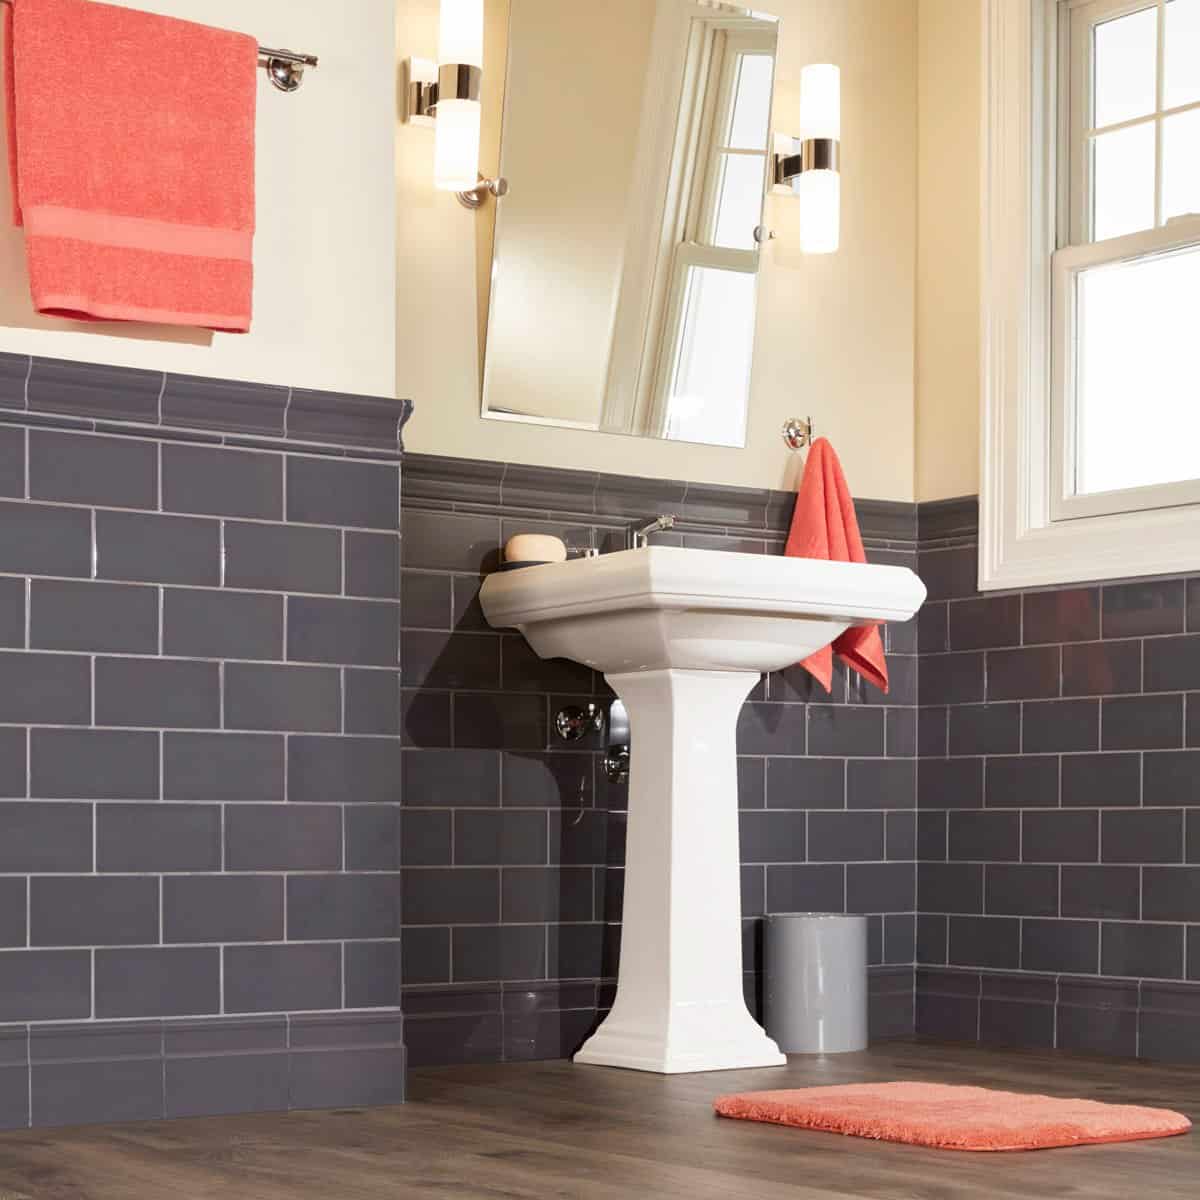 Tips for large subway tiles in bathrooms